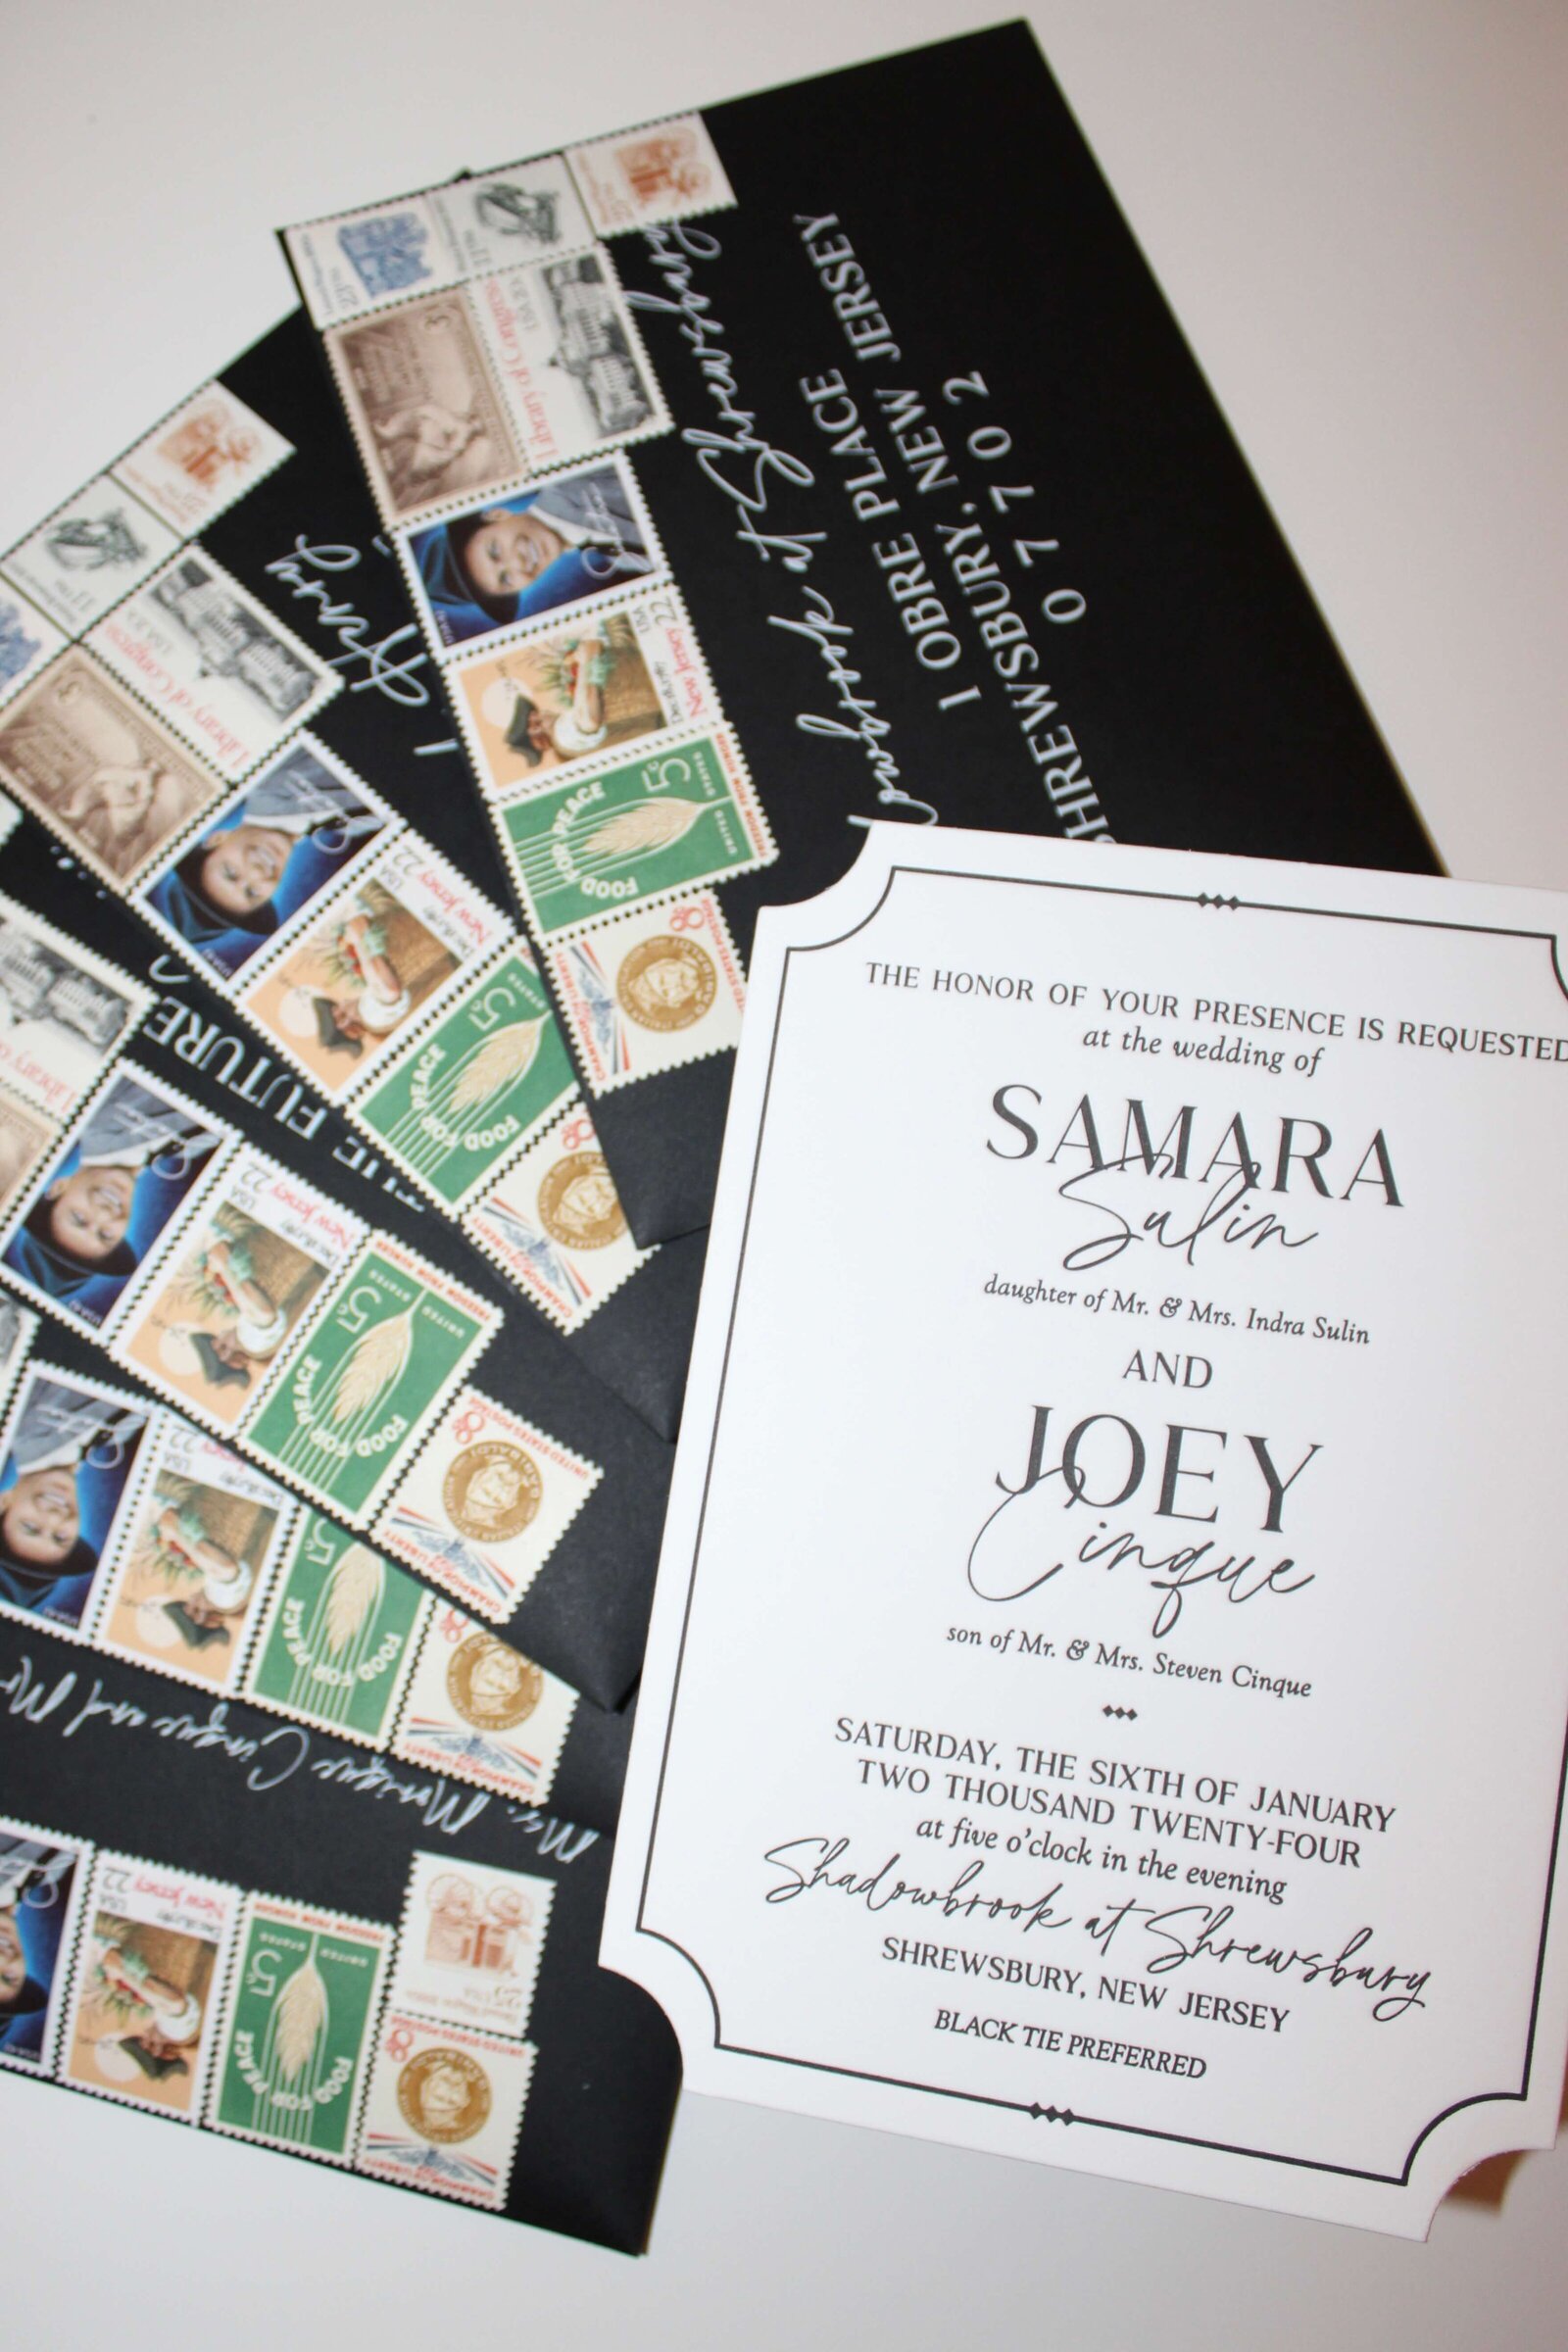 SGH Creative Luxury Wedding Signage & Stationery in New York & New Jersey - Full Gallery (60)